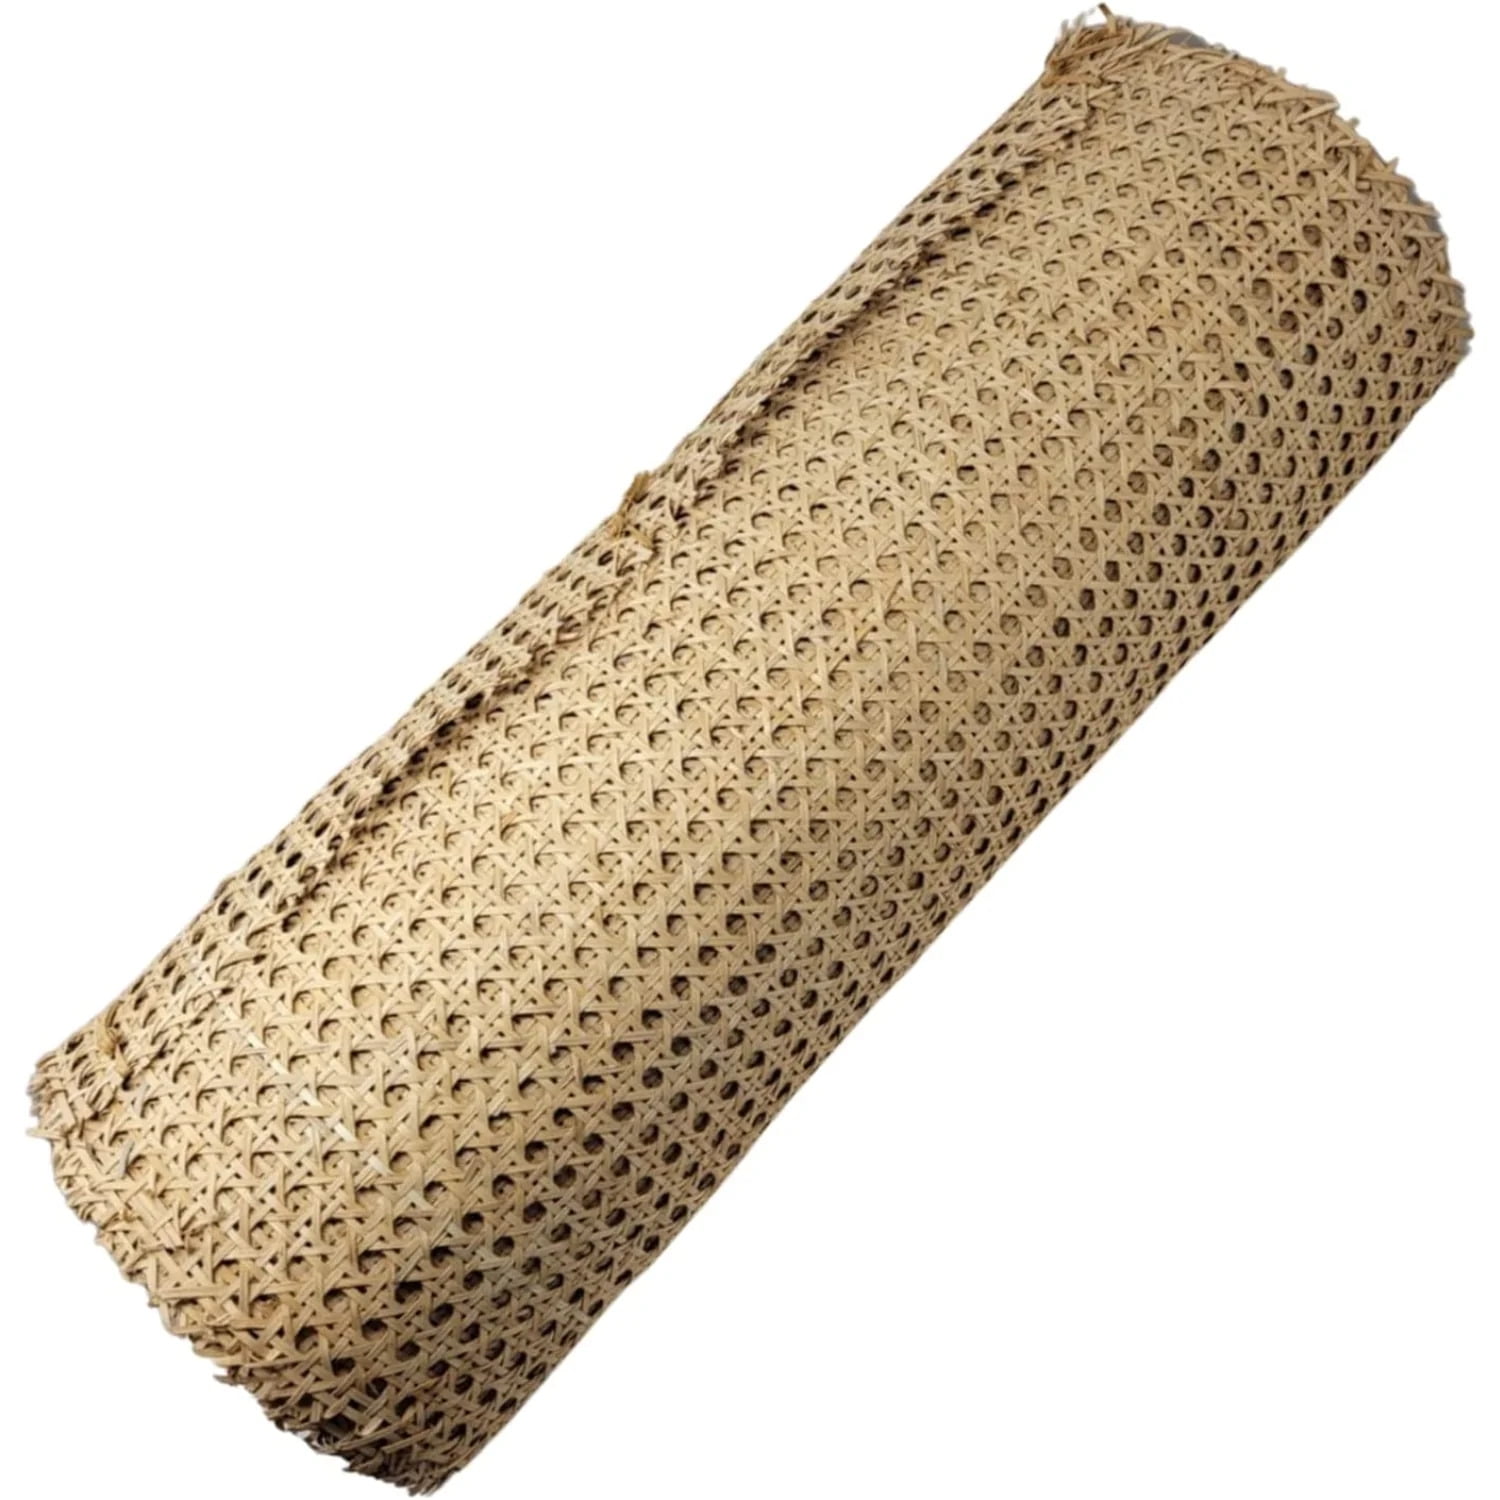 14 Width X 3.3 Feet Cane Rattan Webbing Roll for Caning Projects